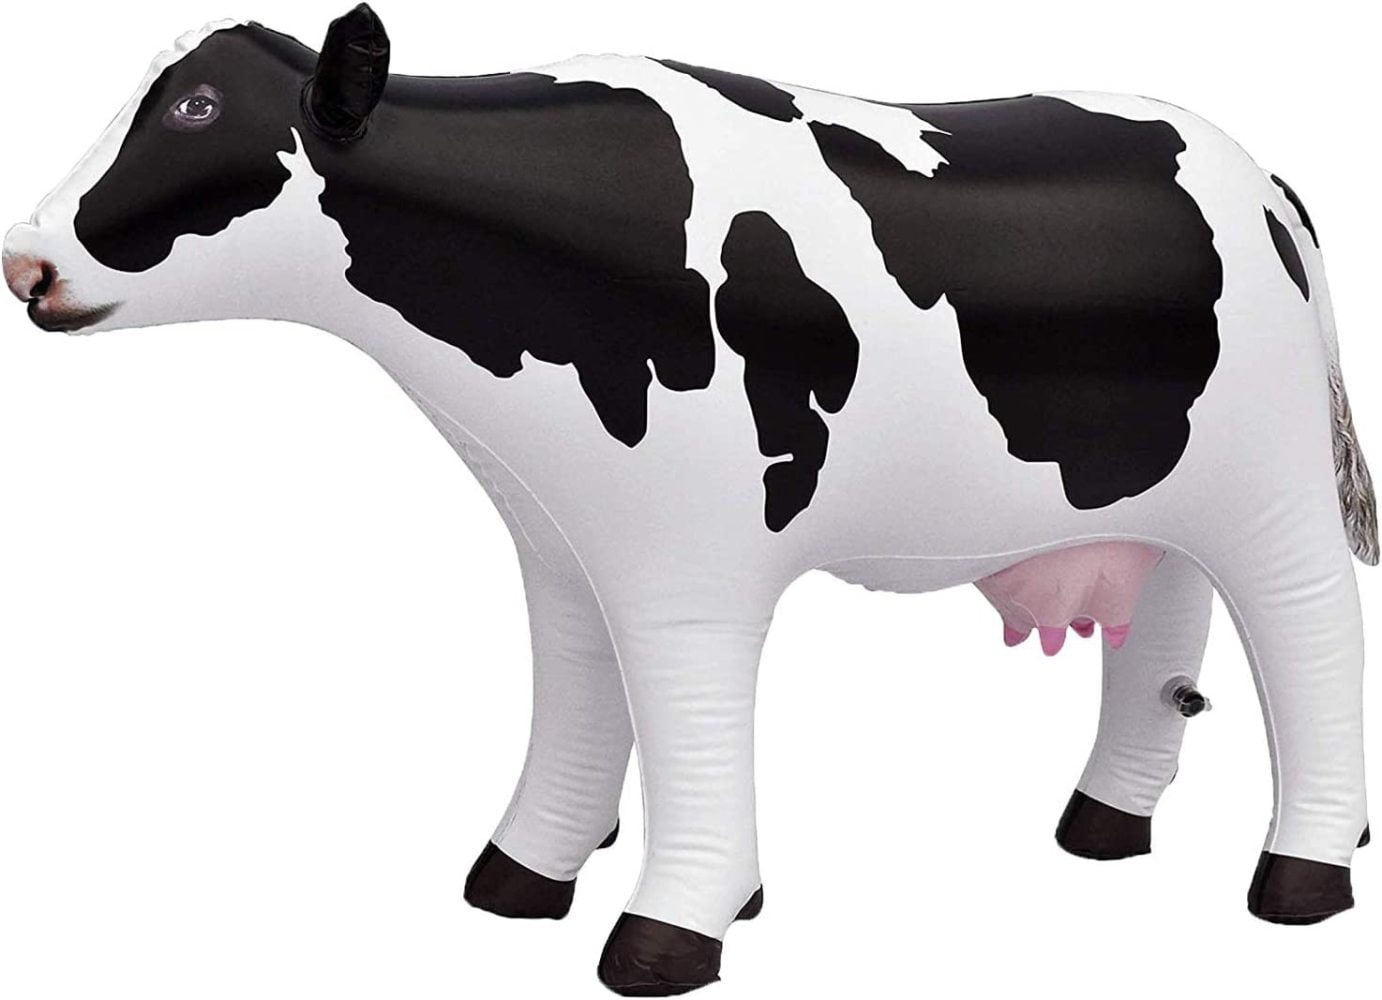 2 Inflatable Cow Horse Farm Animals Replica Realistic Toy Gift Party Home Decor 